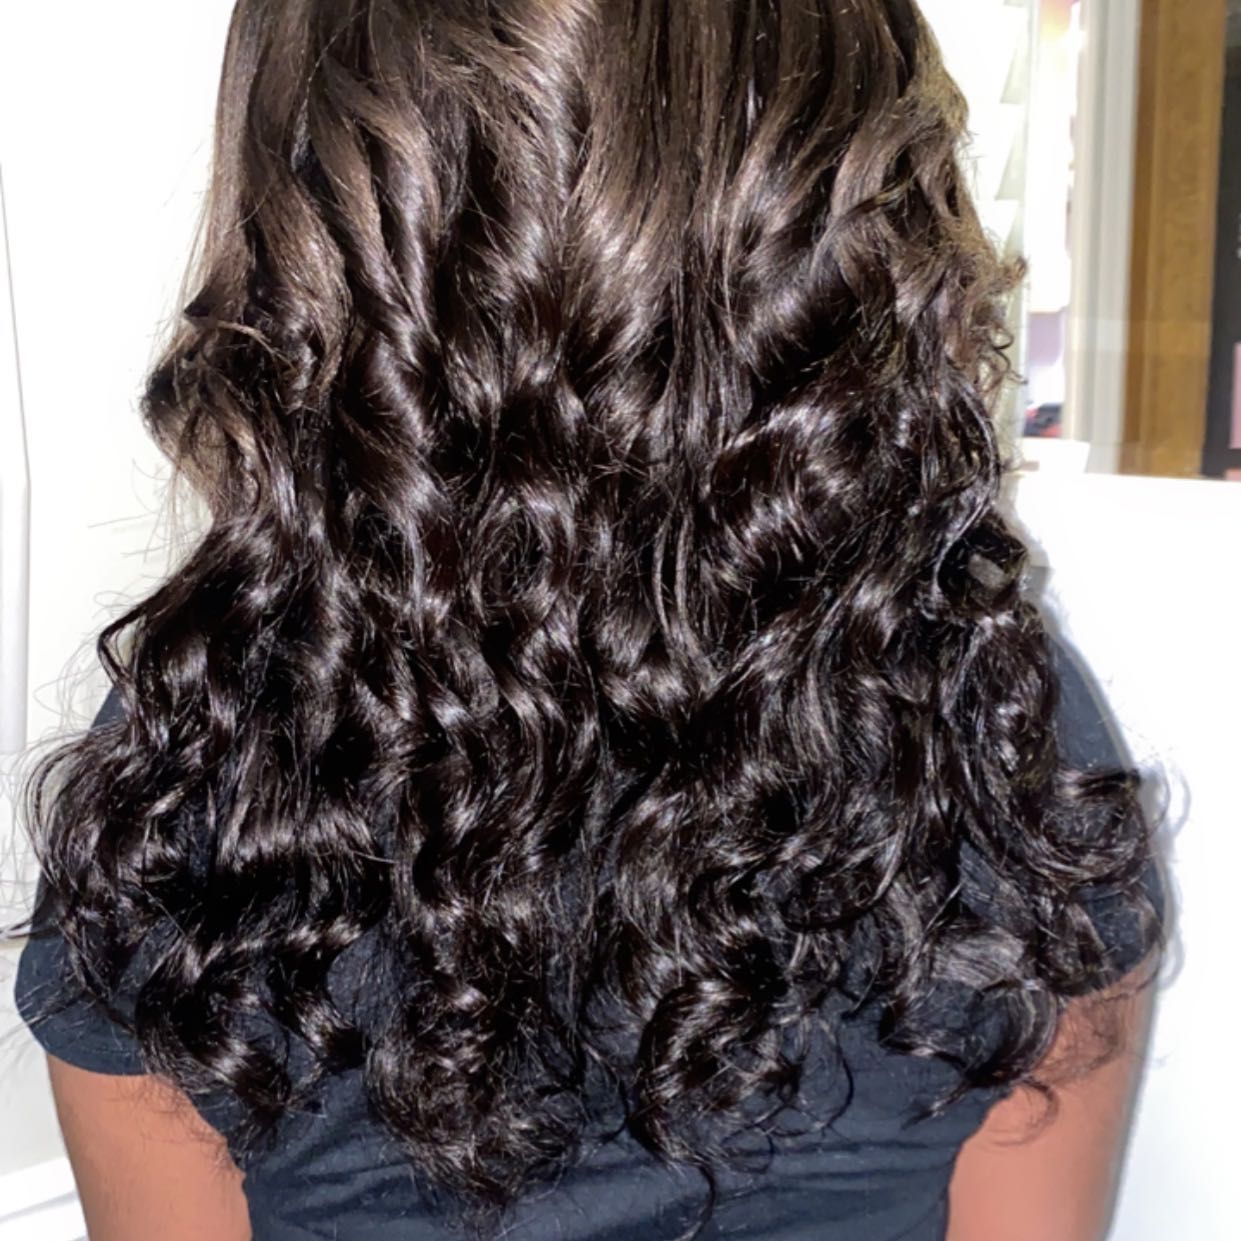 Traditional Sew Ins w/ Leave-out portfolio